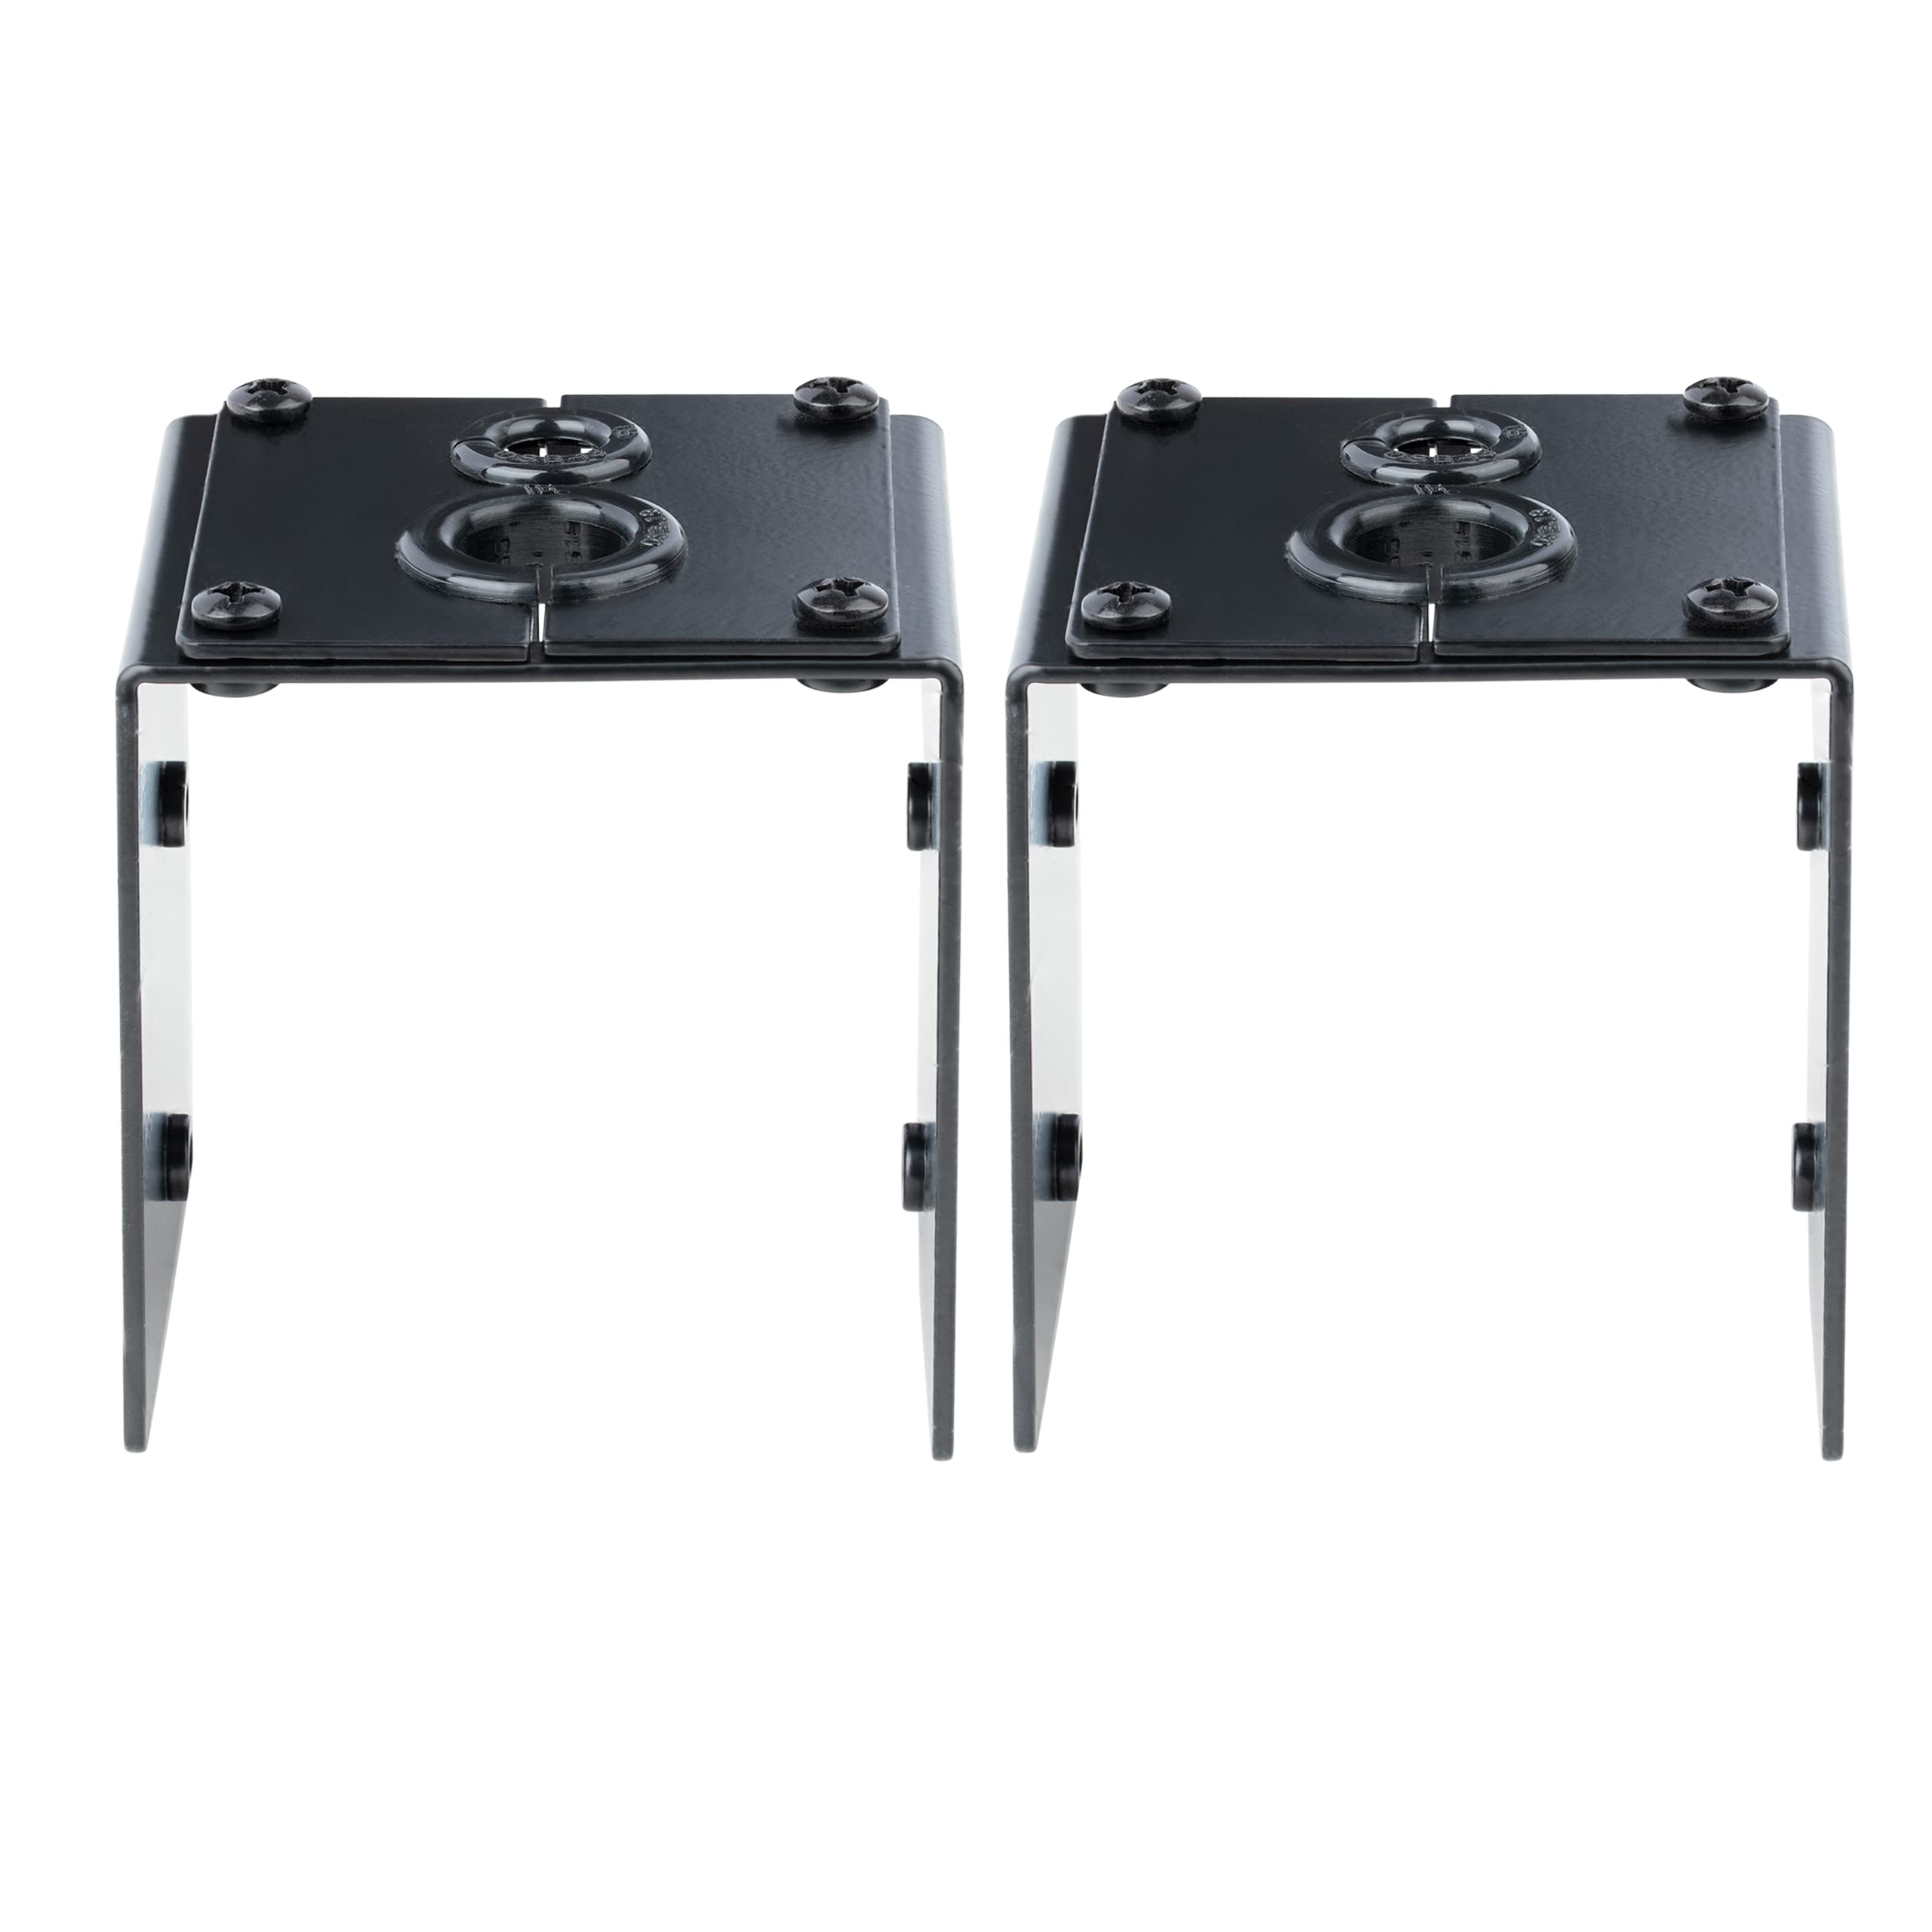 StarTech.com Cable Management Module for Conference Table Connectivity Box - Includes 4X Grommet Holes - Installs in BOX4MODULE or BEZ4MOD (MOD4CABLEH)